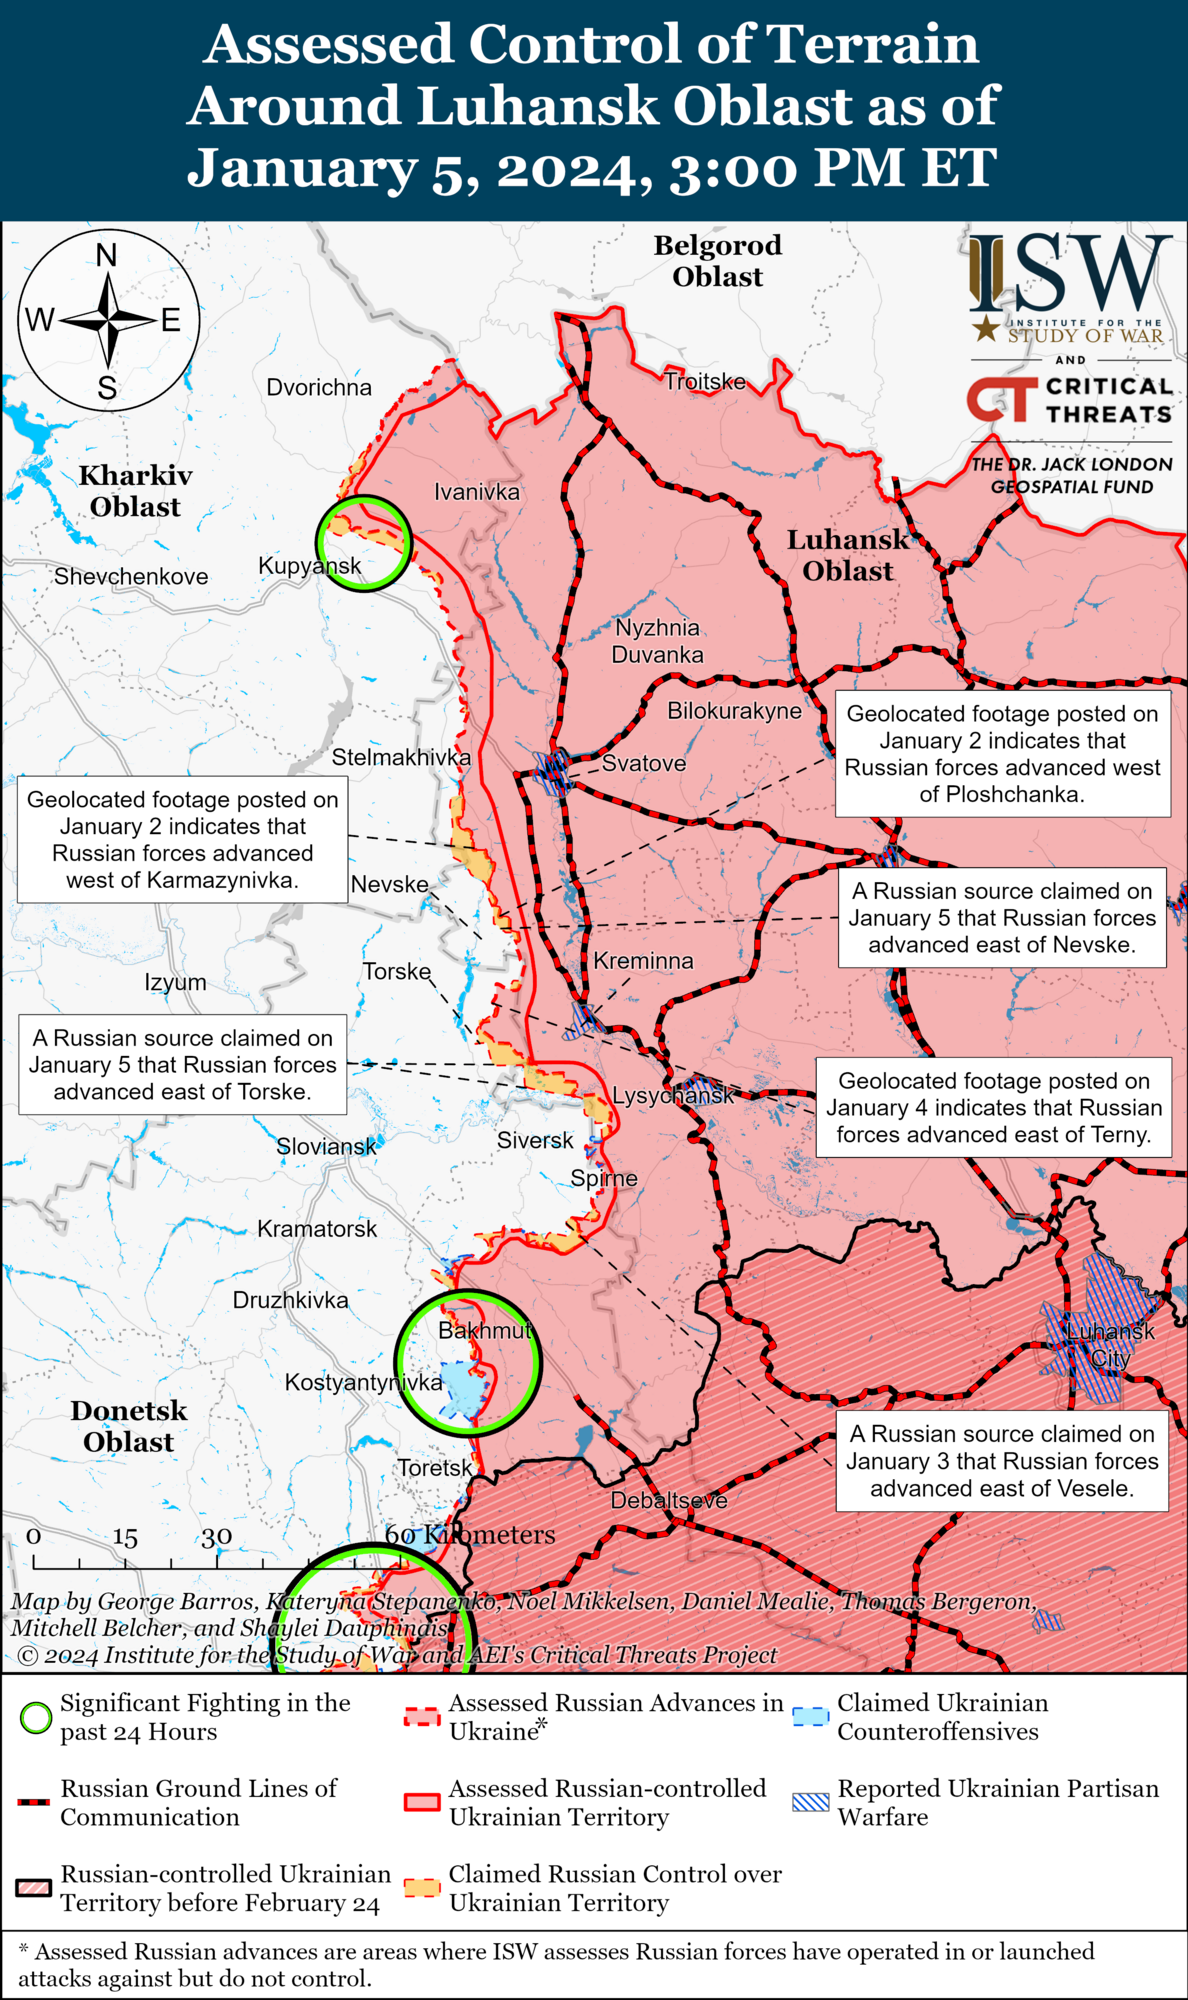 Positional fighting continues near Bakhmut, Russian troops slightly advance near Avdiivka: analysis from ISW